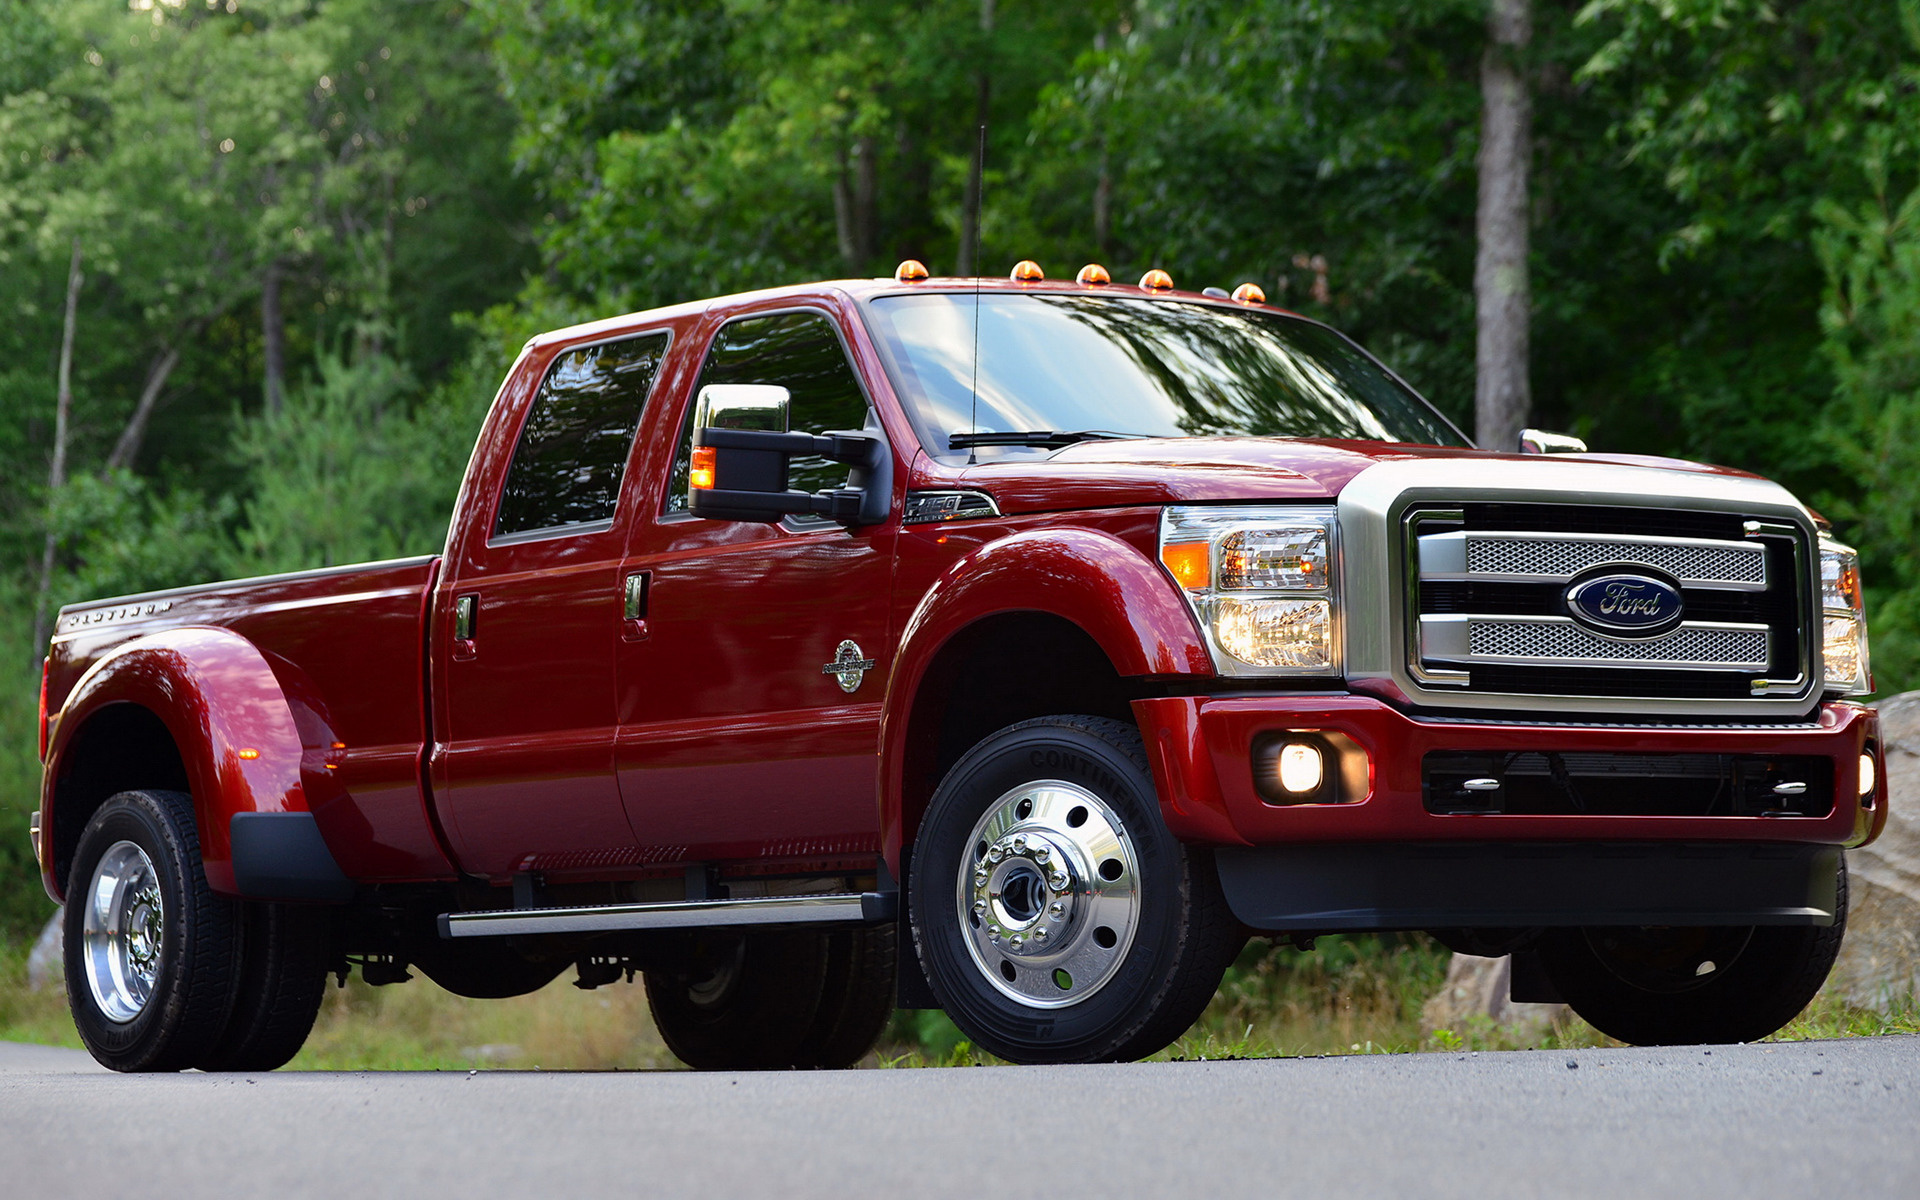 2013 Ford F-Series Super Duty Wallpapers